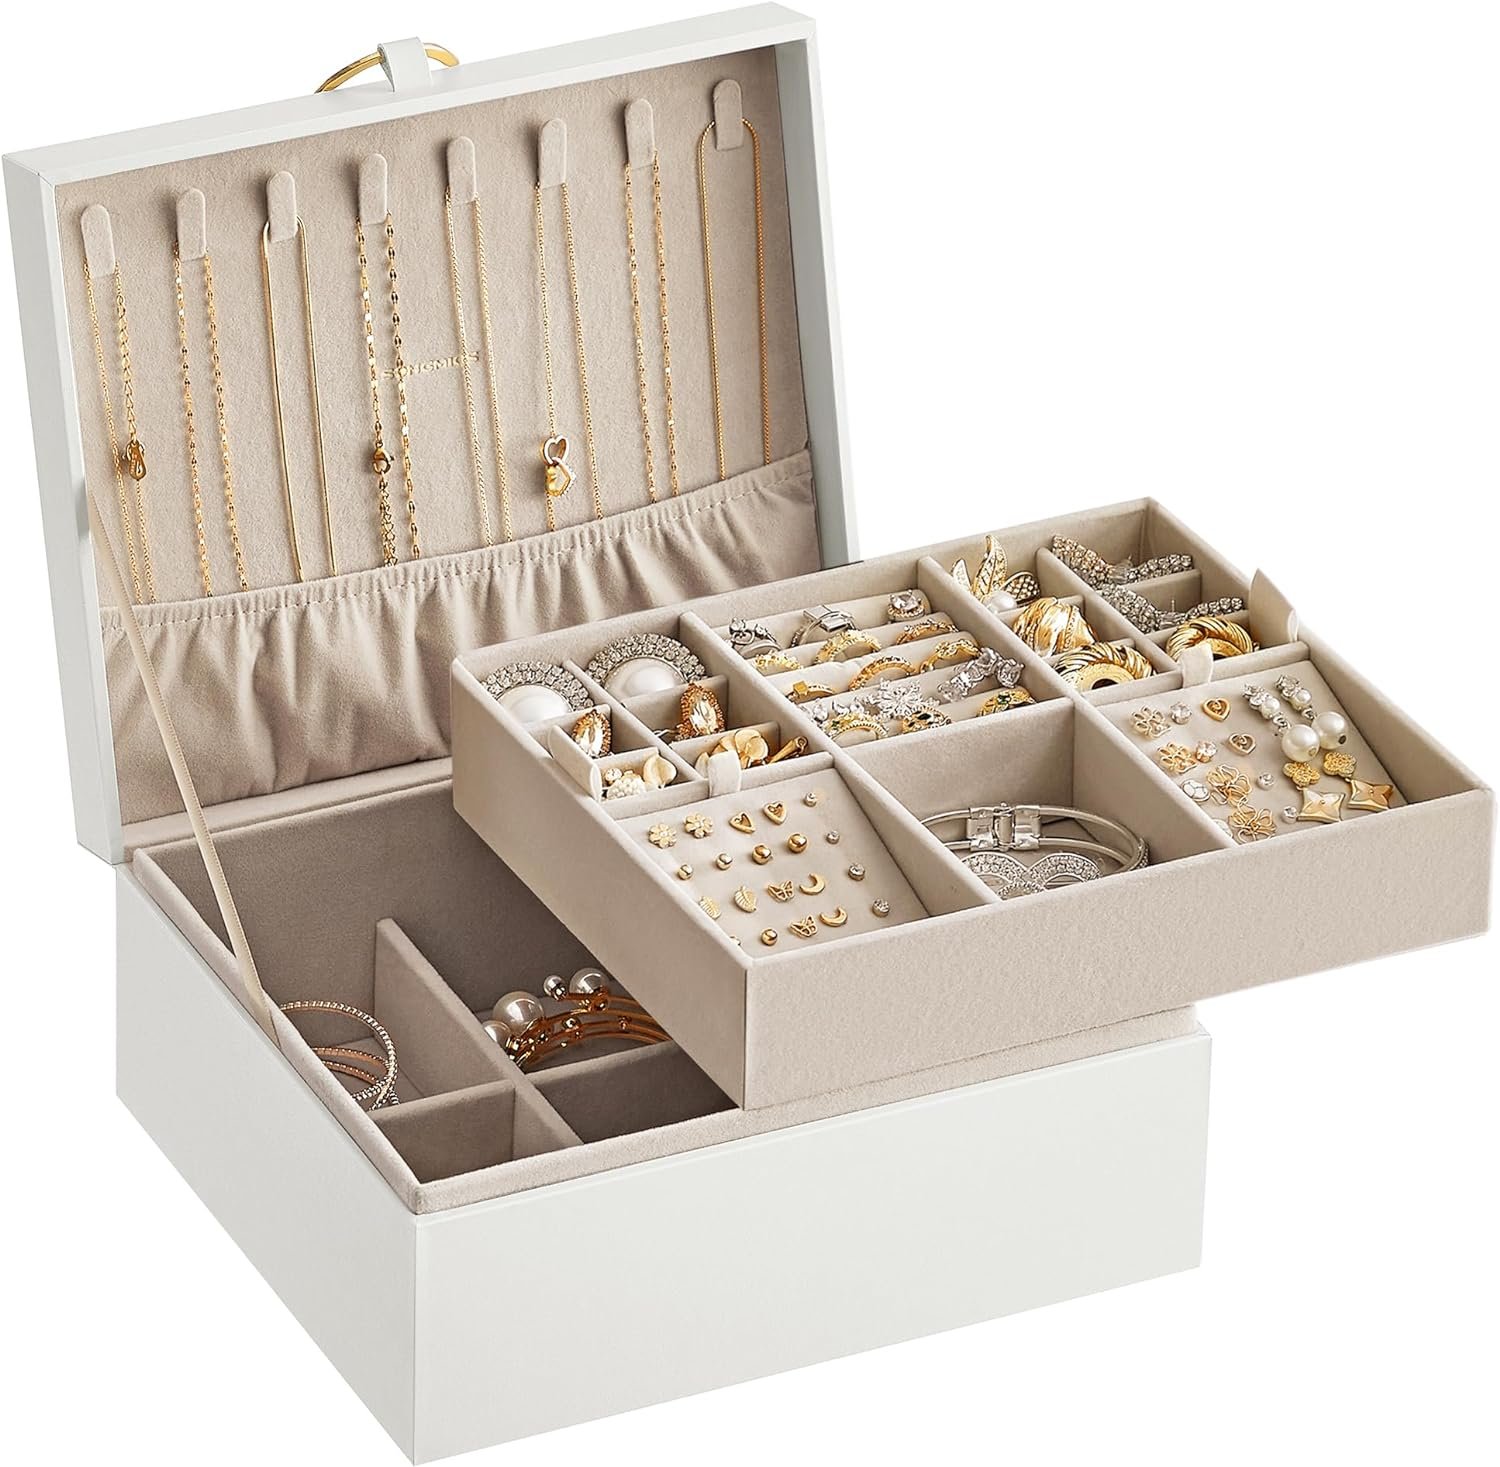 Jewelry Boxes: Explore 8 Ultimate Jewelry Storage Solutions: Boxes ...